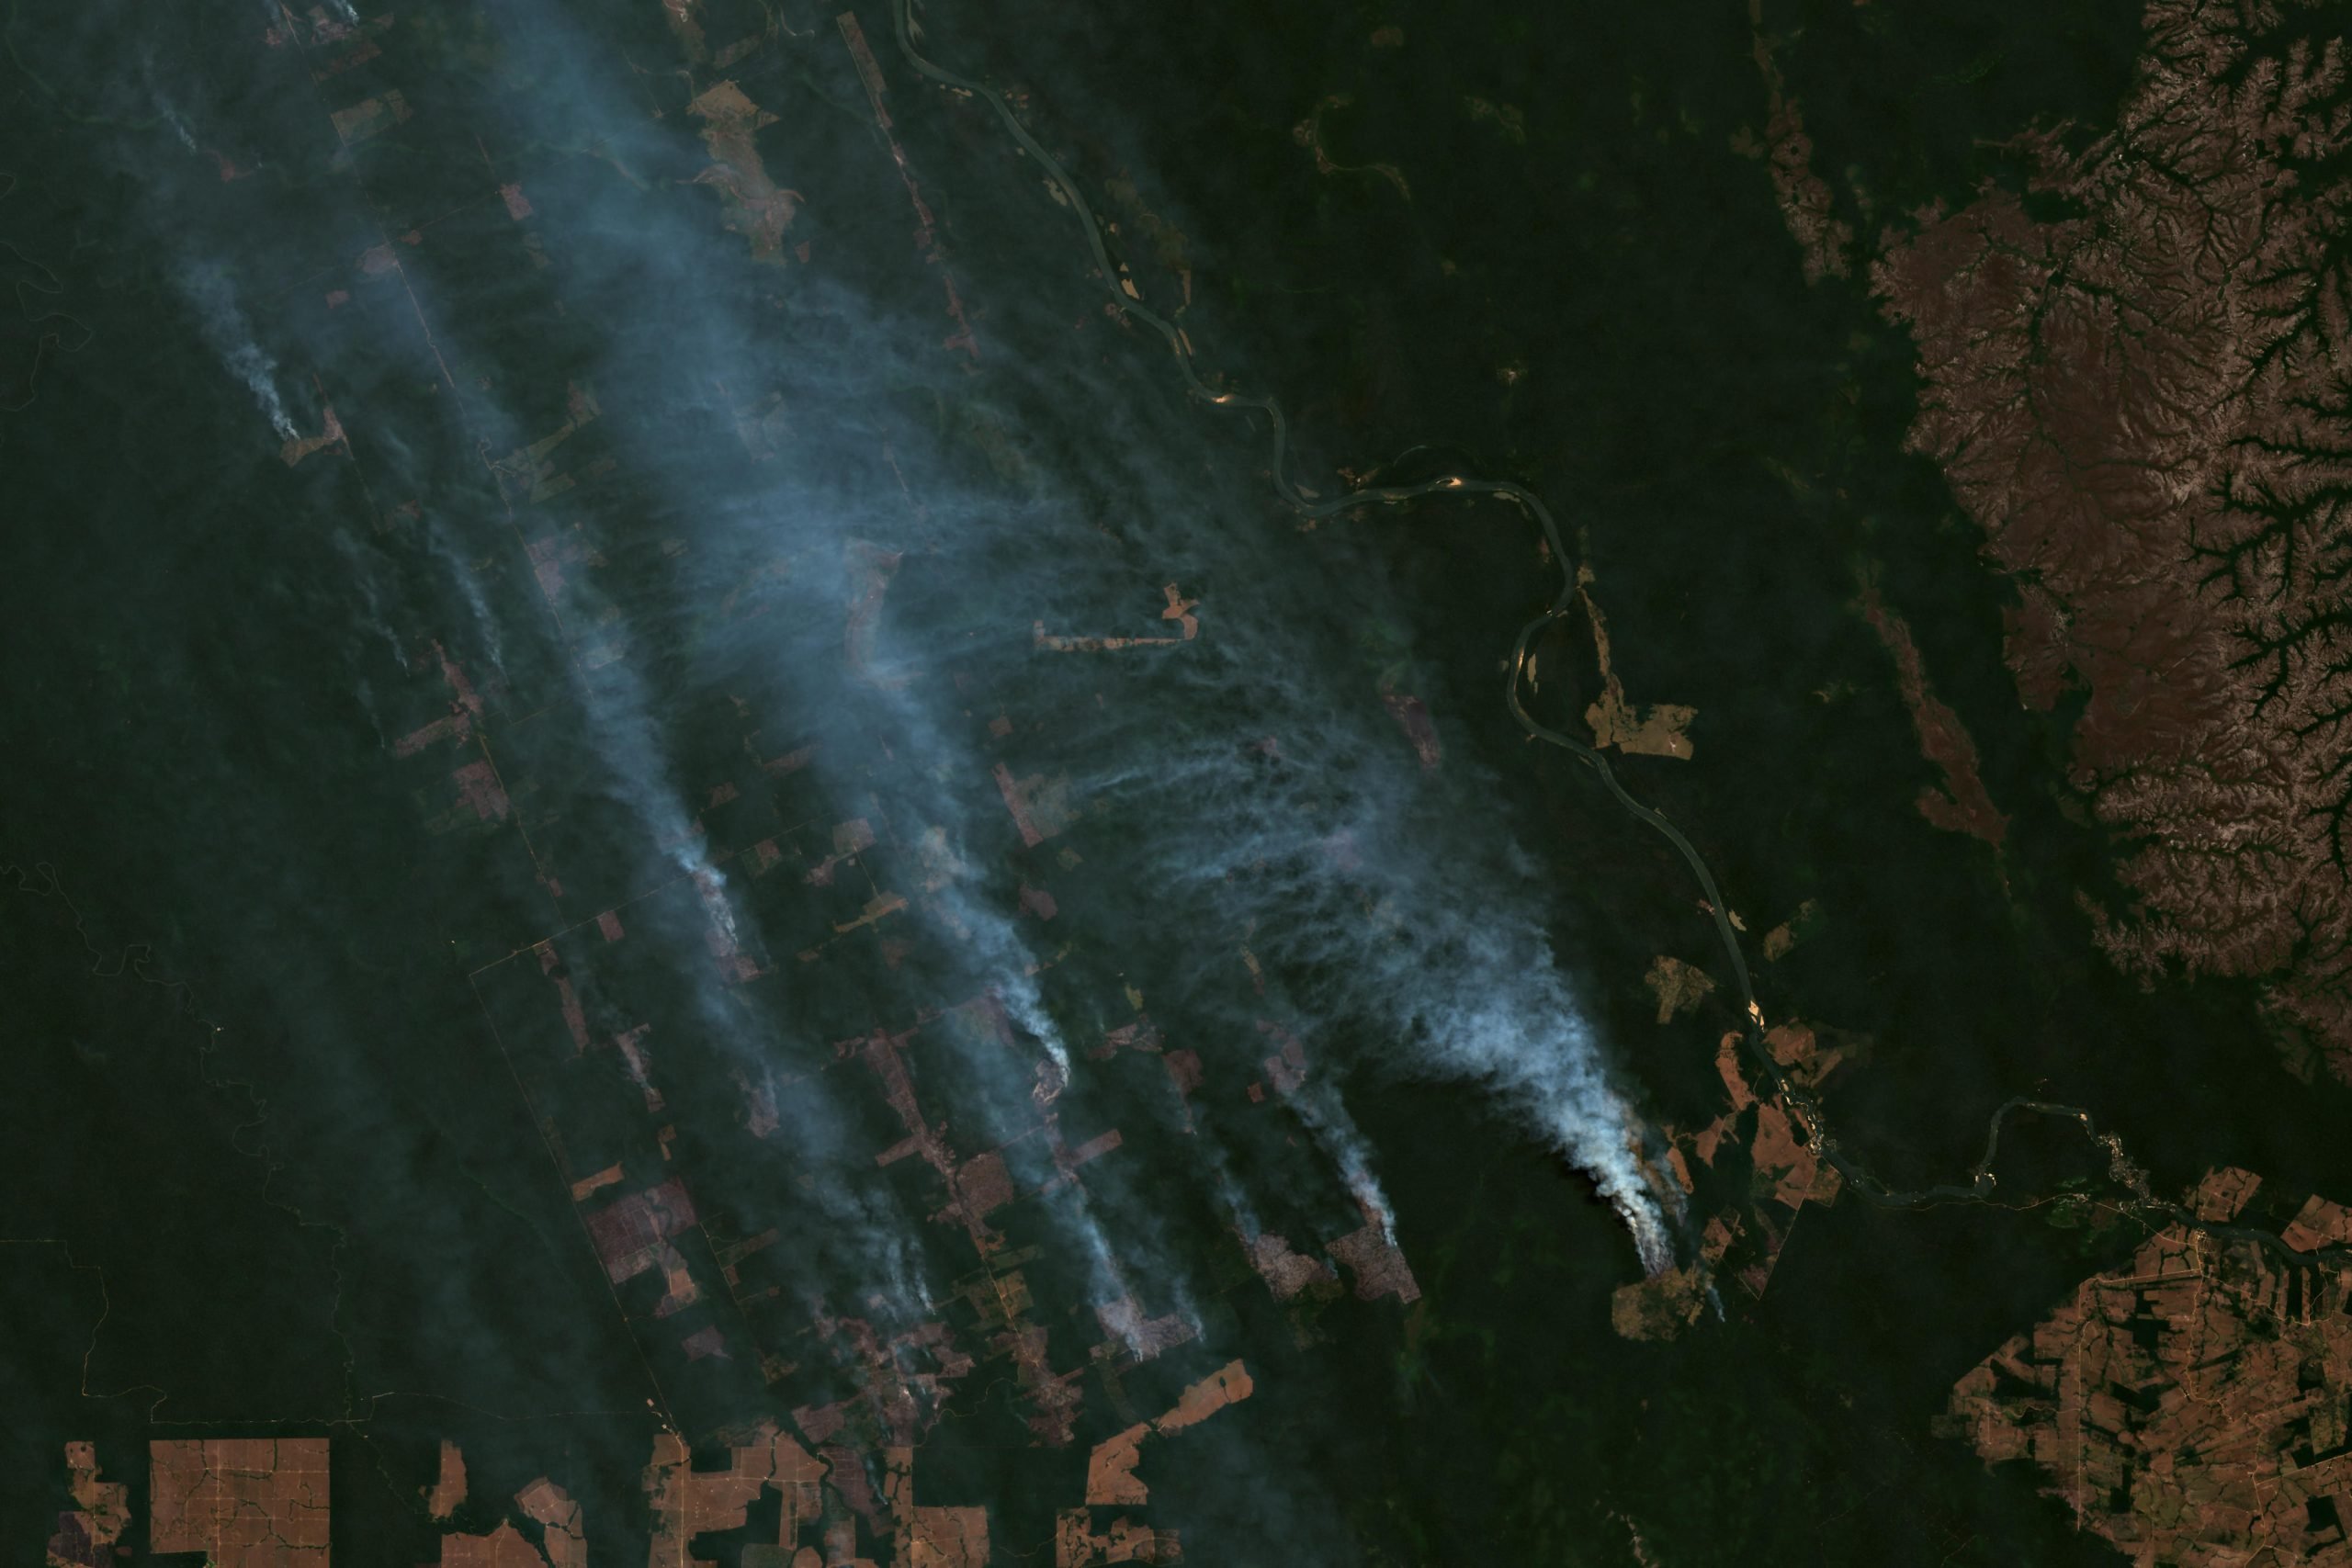 Aerial view of fires in the amazon